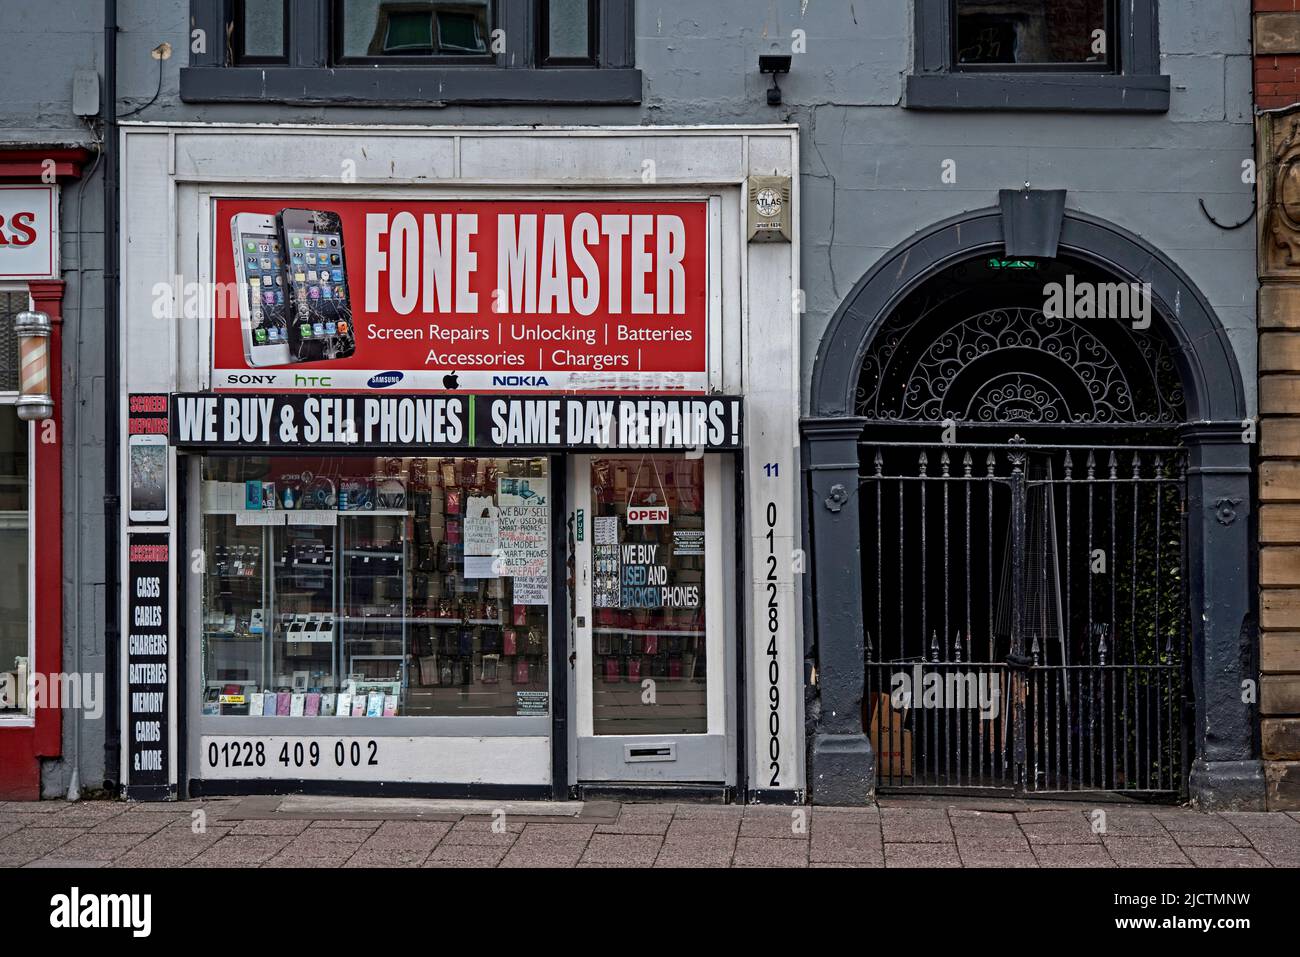 Exterior view of Fone master, a mobile phone repair shop in Lowther Street, Carlisle, England, UK. Stock Photo